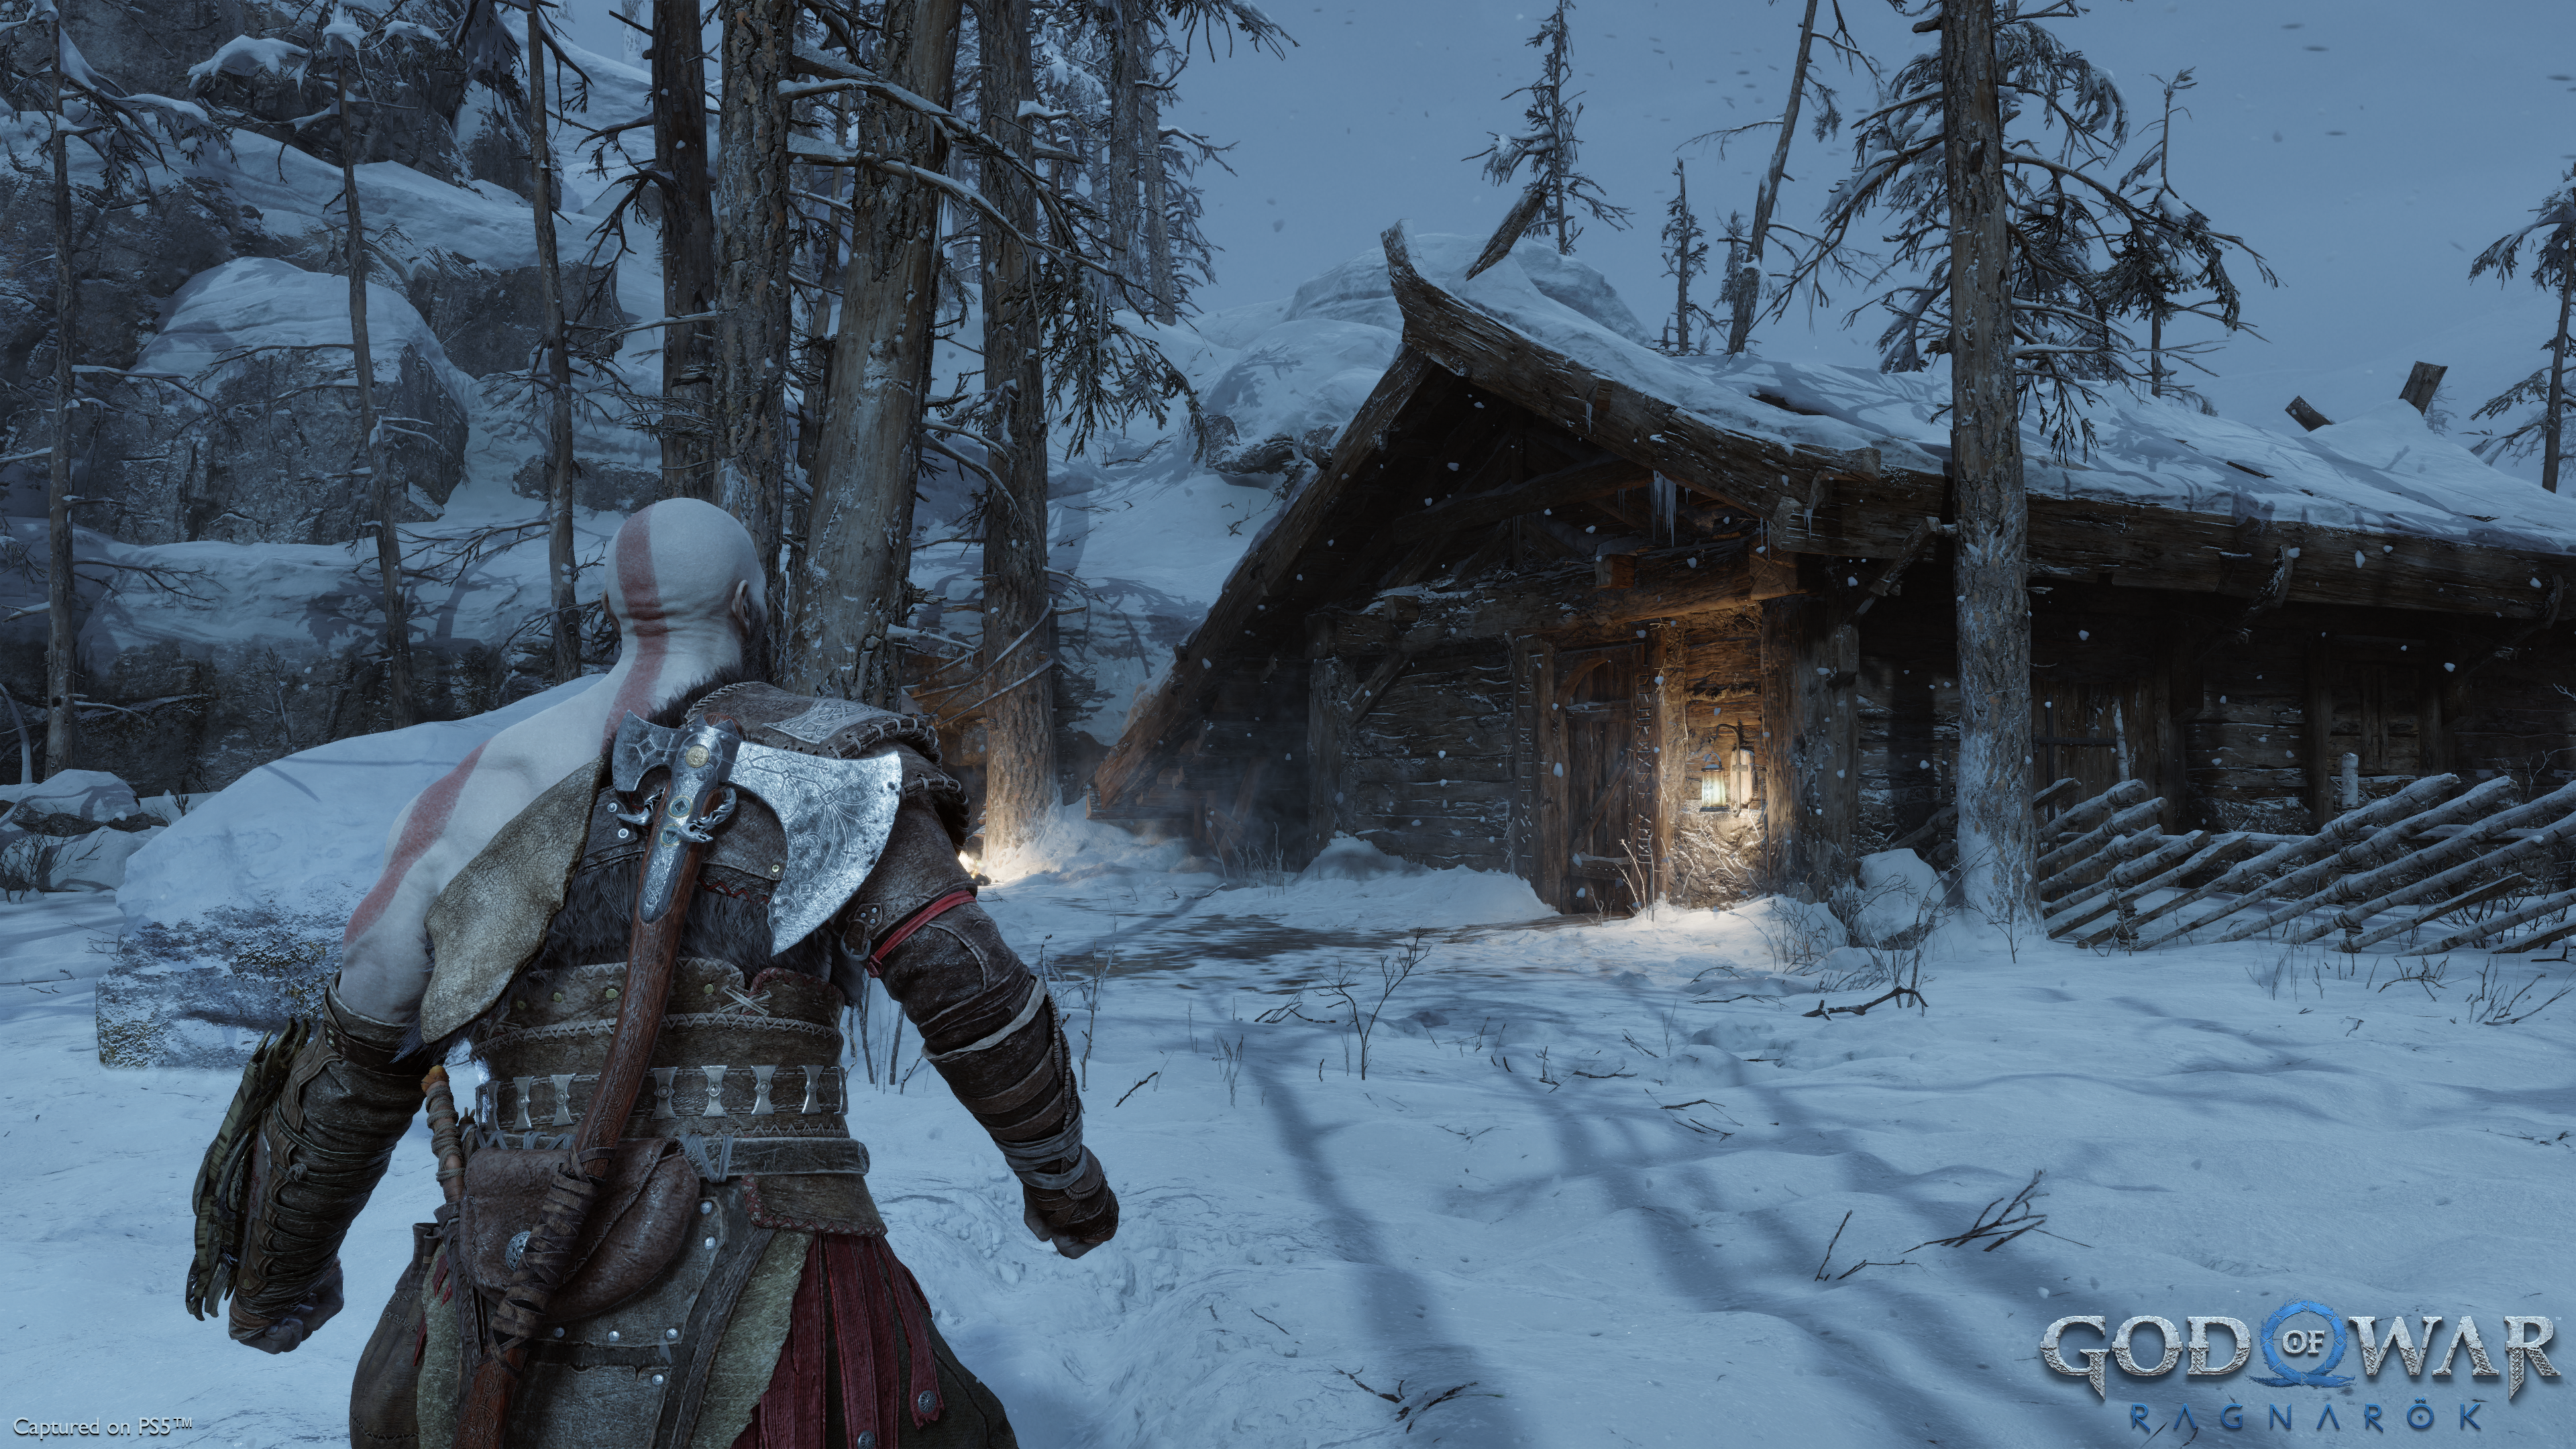 God of War preview - Kratos stomps towards his snowy home